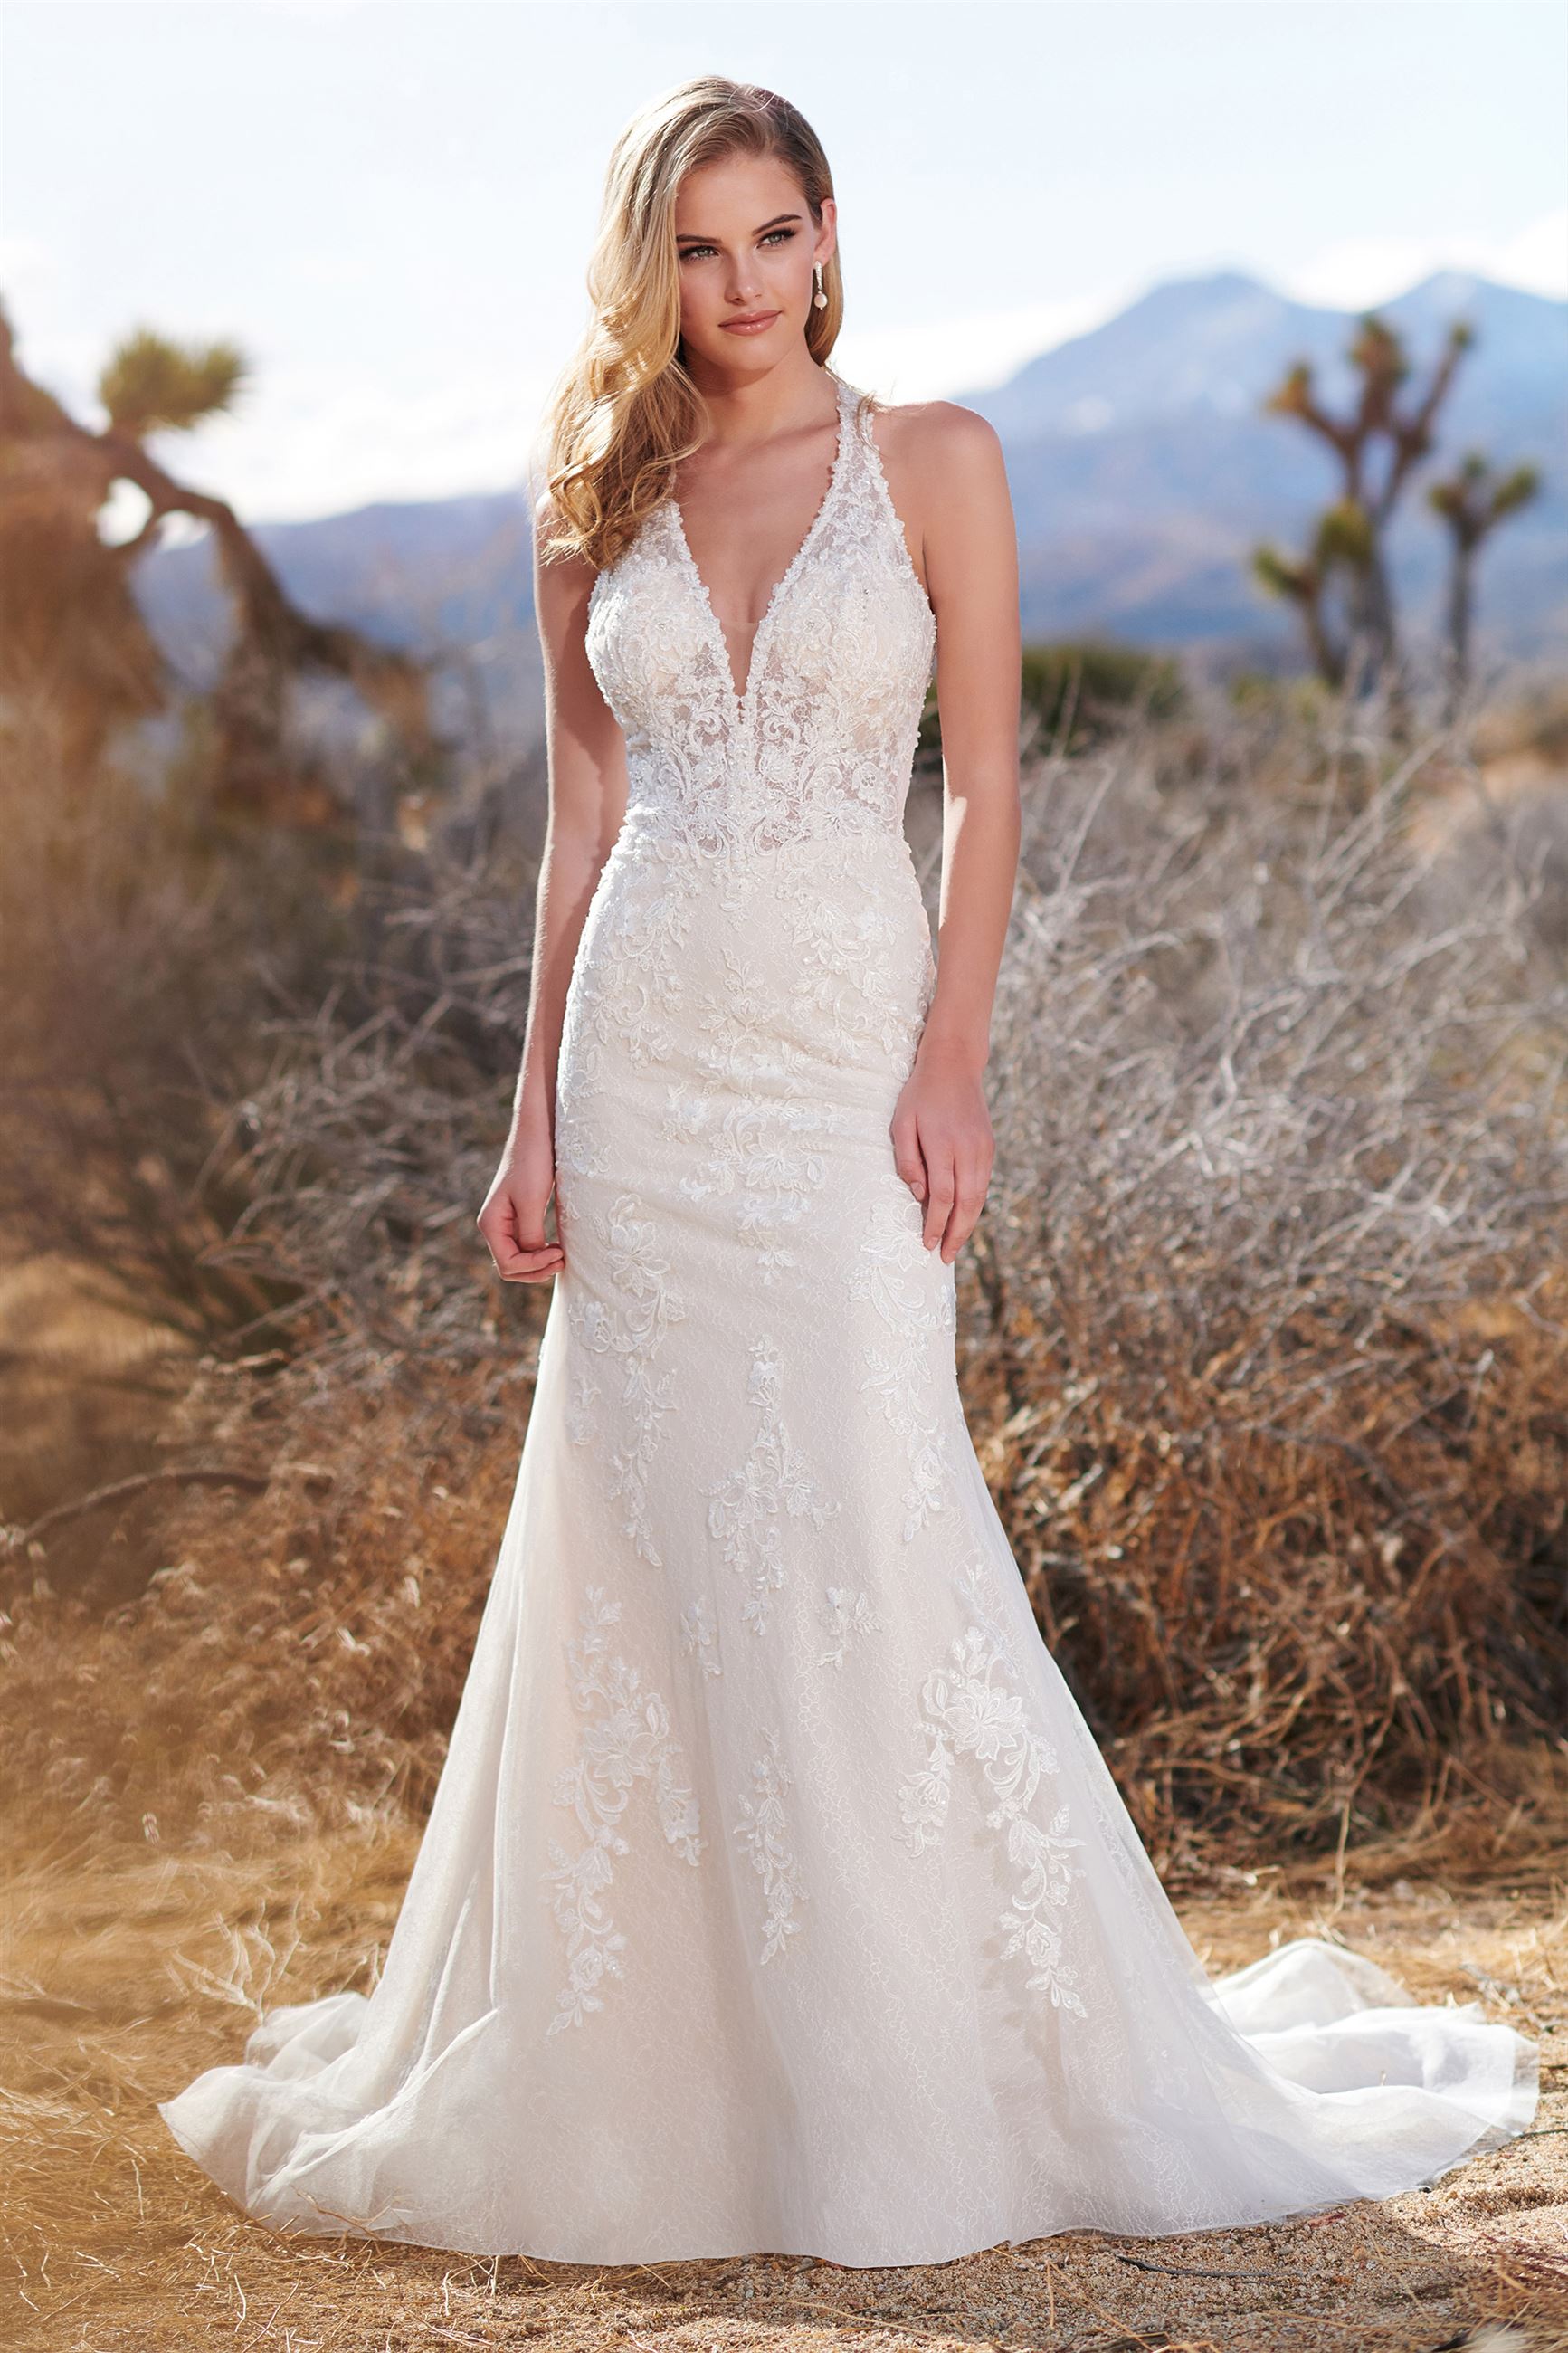  Champagne and Ivory Wedding Dress